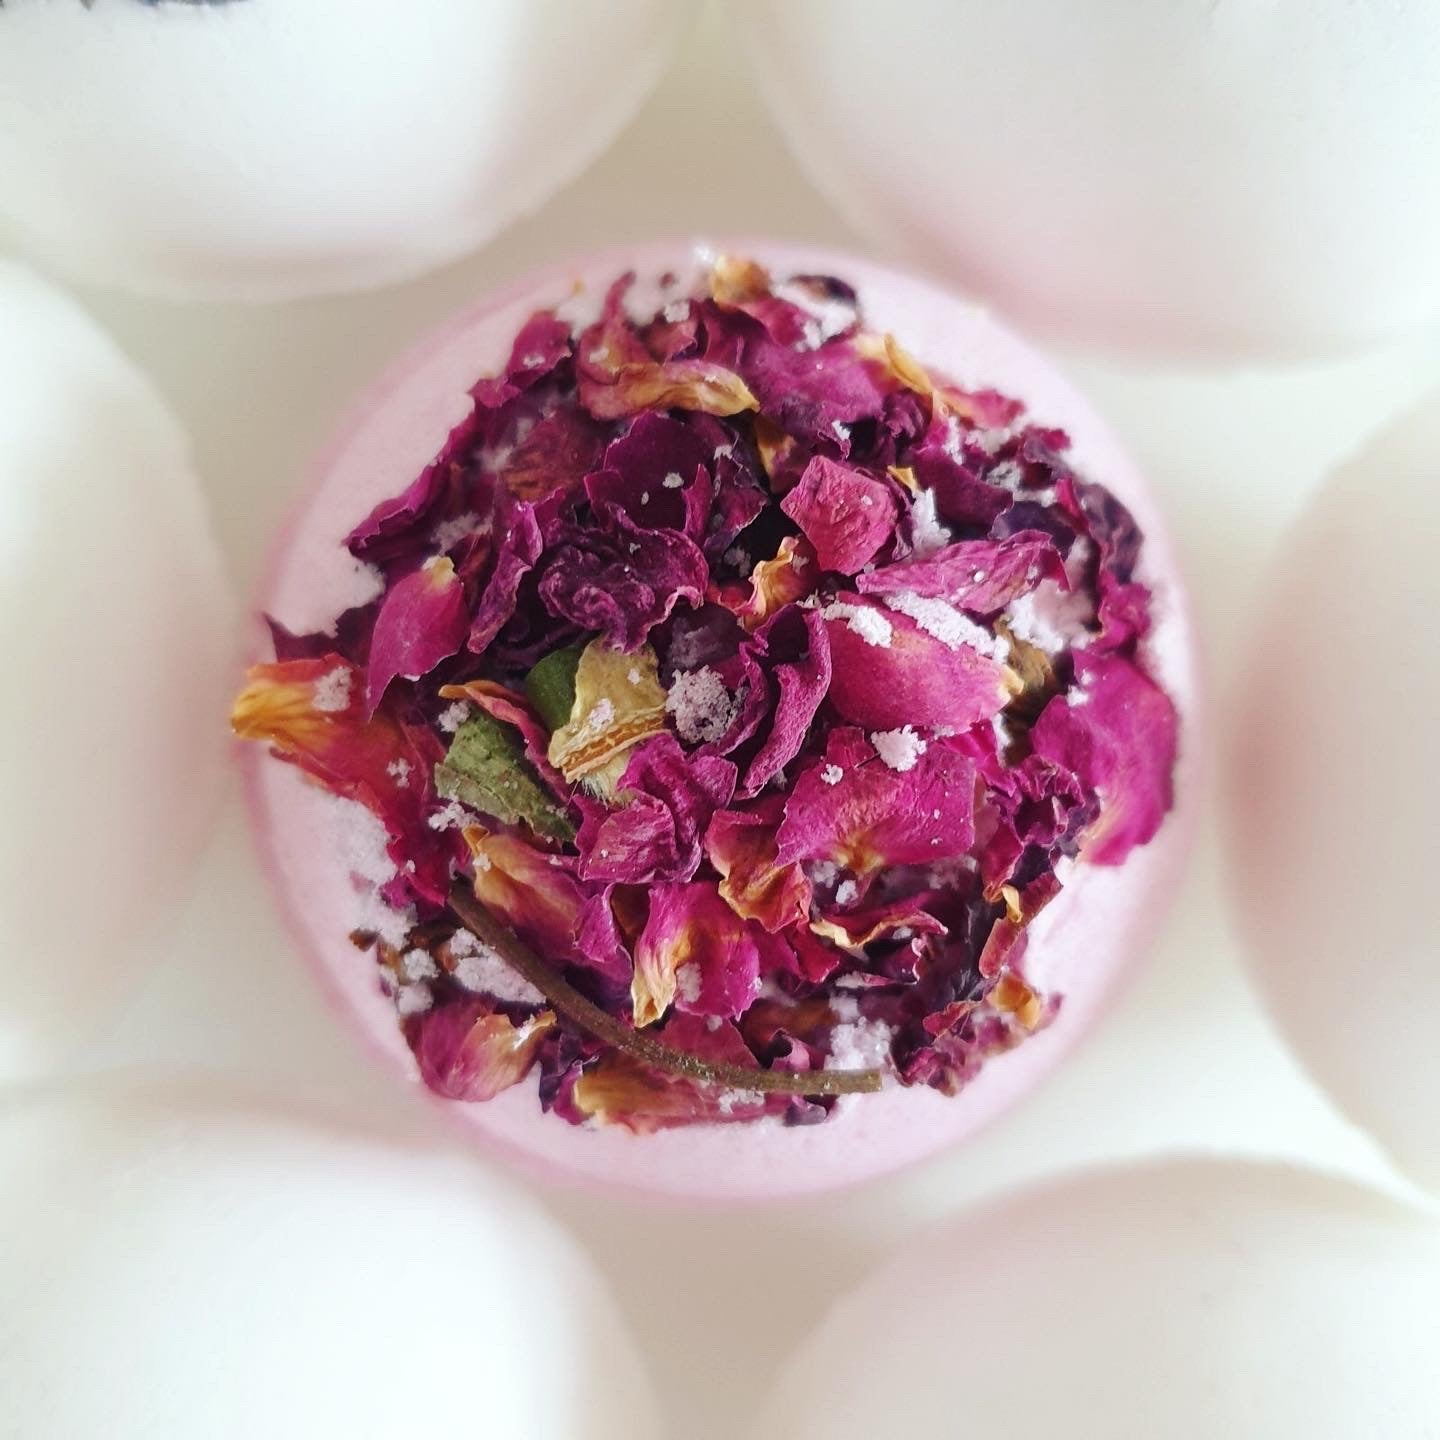 Anti-Anxiety Secret Bath Bomb with vibrant pink colour thanks to beetroot powder. Scented with bergamot, lavender, ylang-ylang essential oils, decorated with dried rose petals.